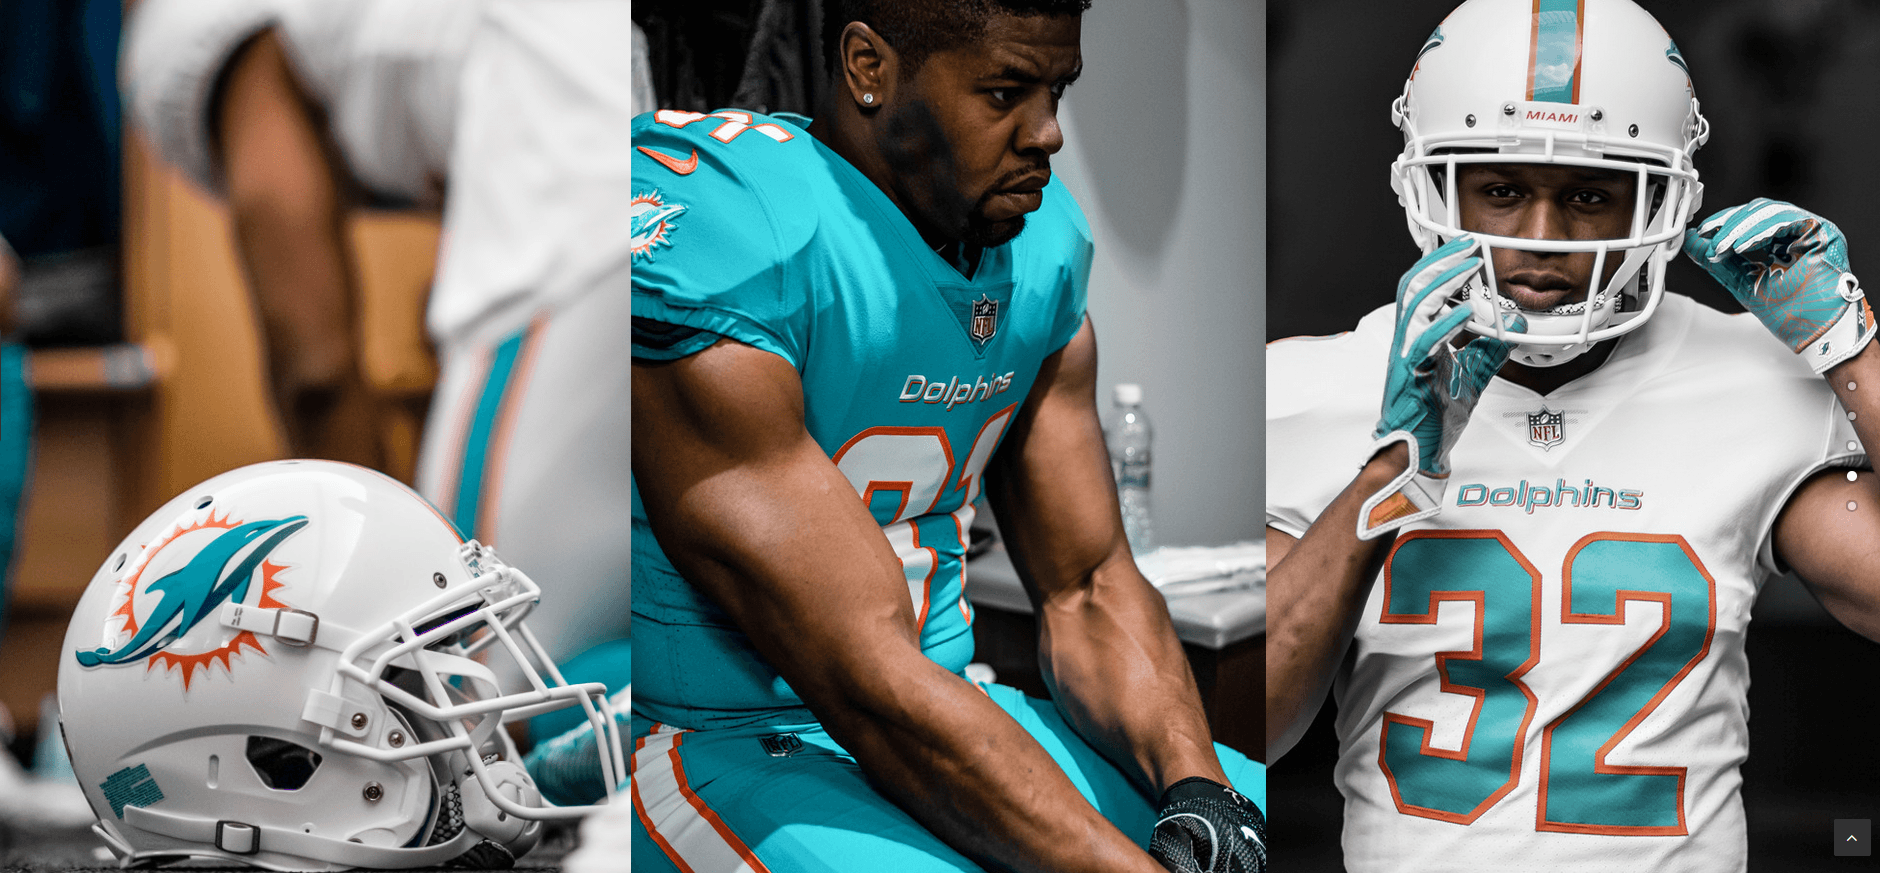 Miami Dolphins New Helmet Logo - First look at new Miami Dolphins Nike uniforms for 2018 NFL season